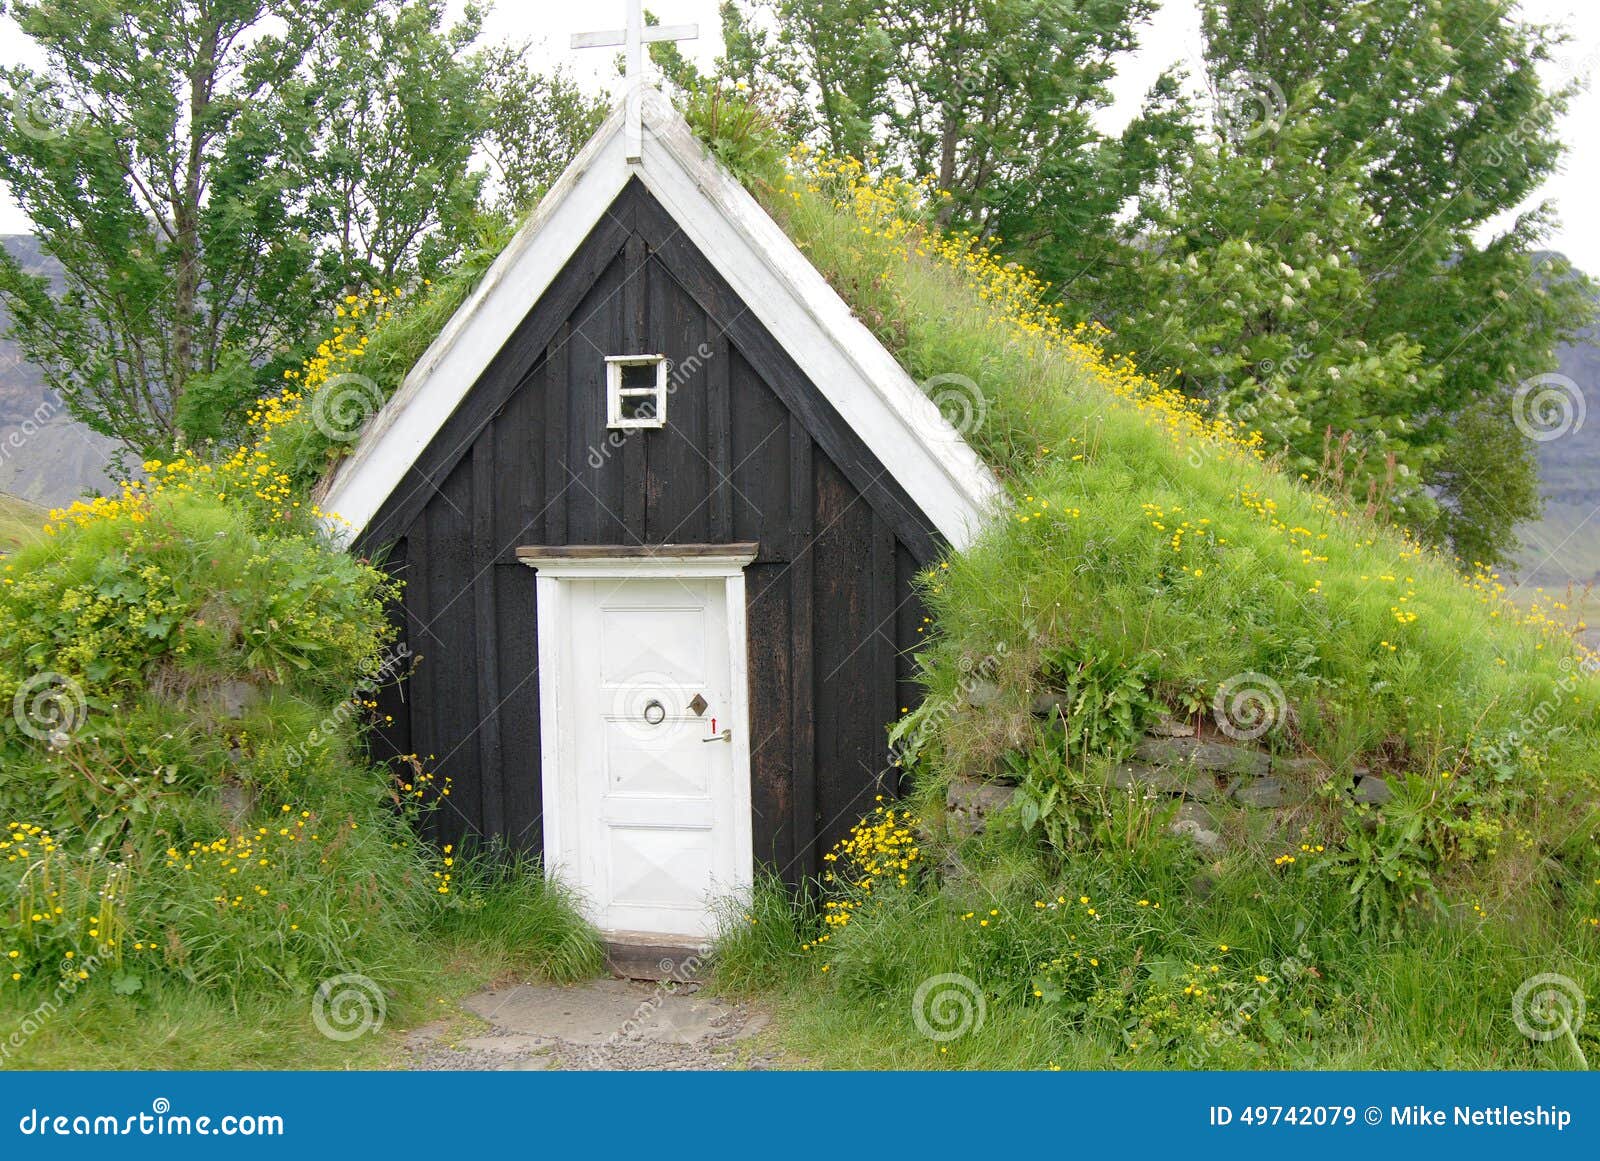 grass roofed house in iceland used as shelter for travellers